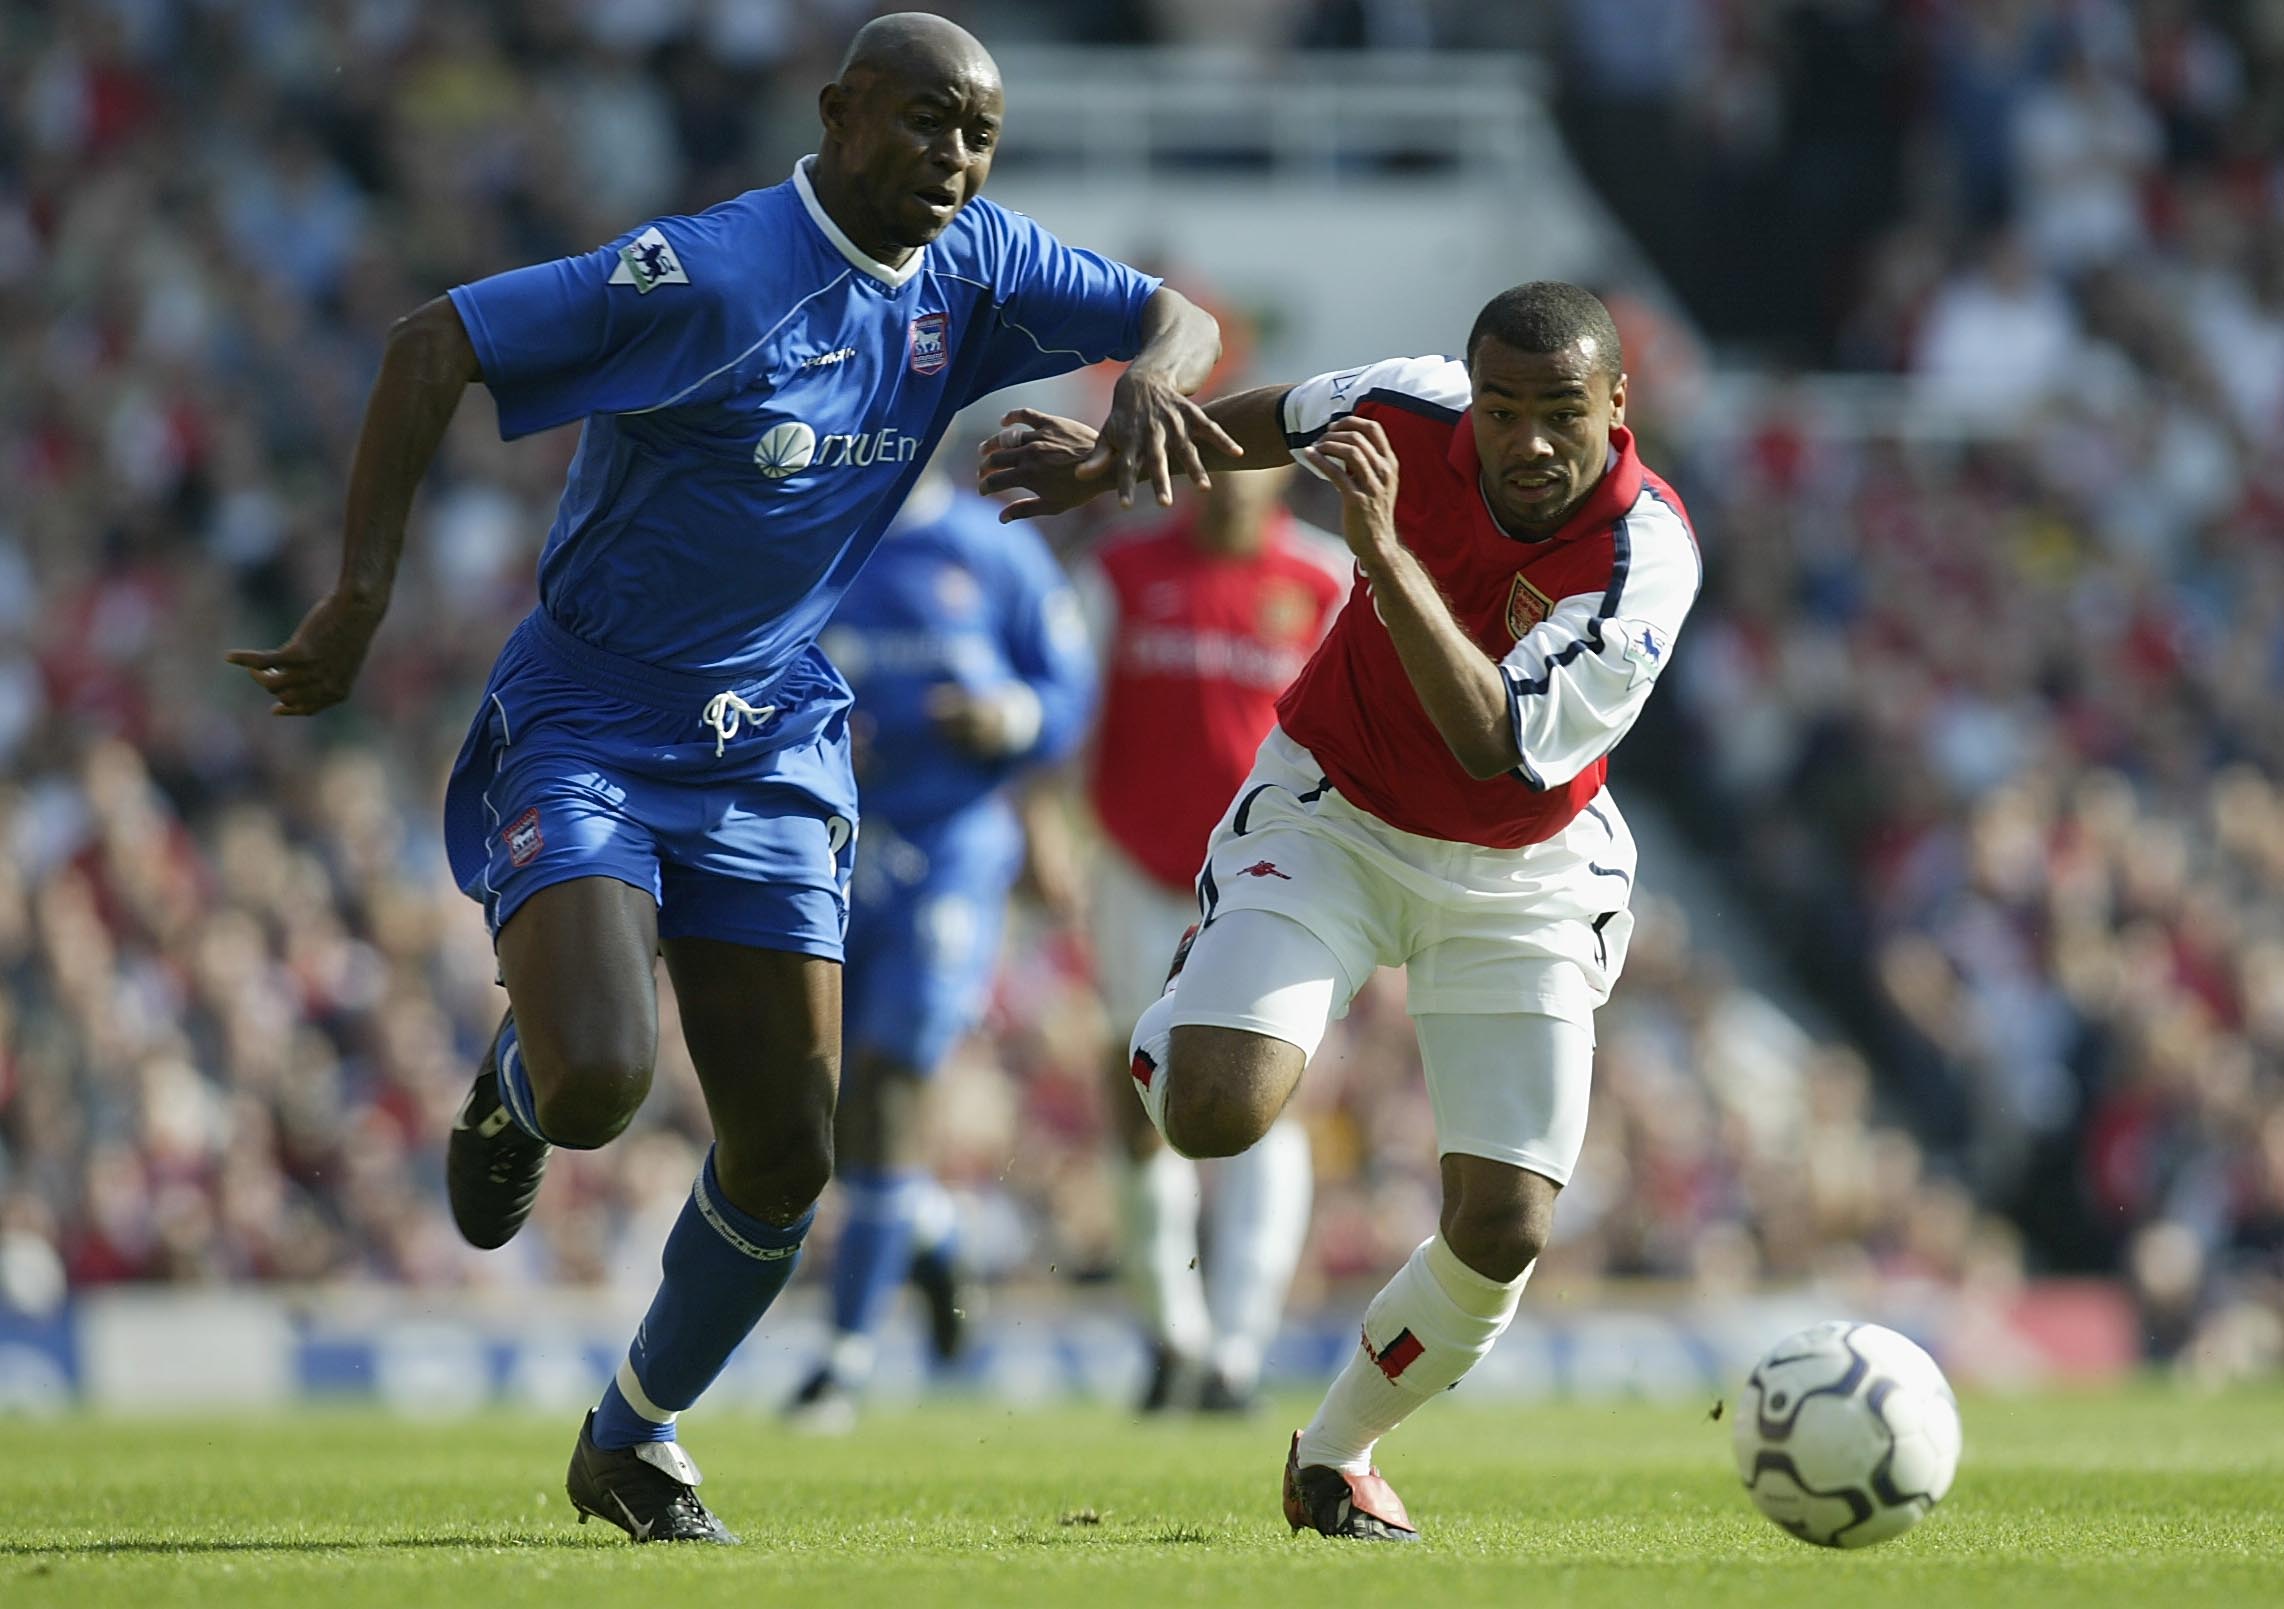  Finidi George of Ipswich Town tries to tackle Ashley Cole of Arsenal during the FA Barclaycard Premiership match between Arsenal and Ipswich Town at Highbury, London. 